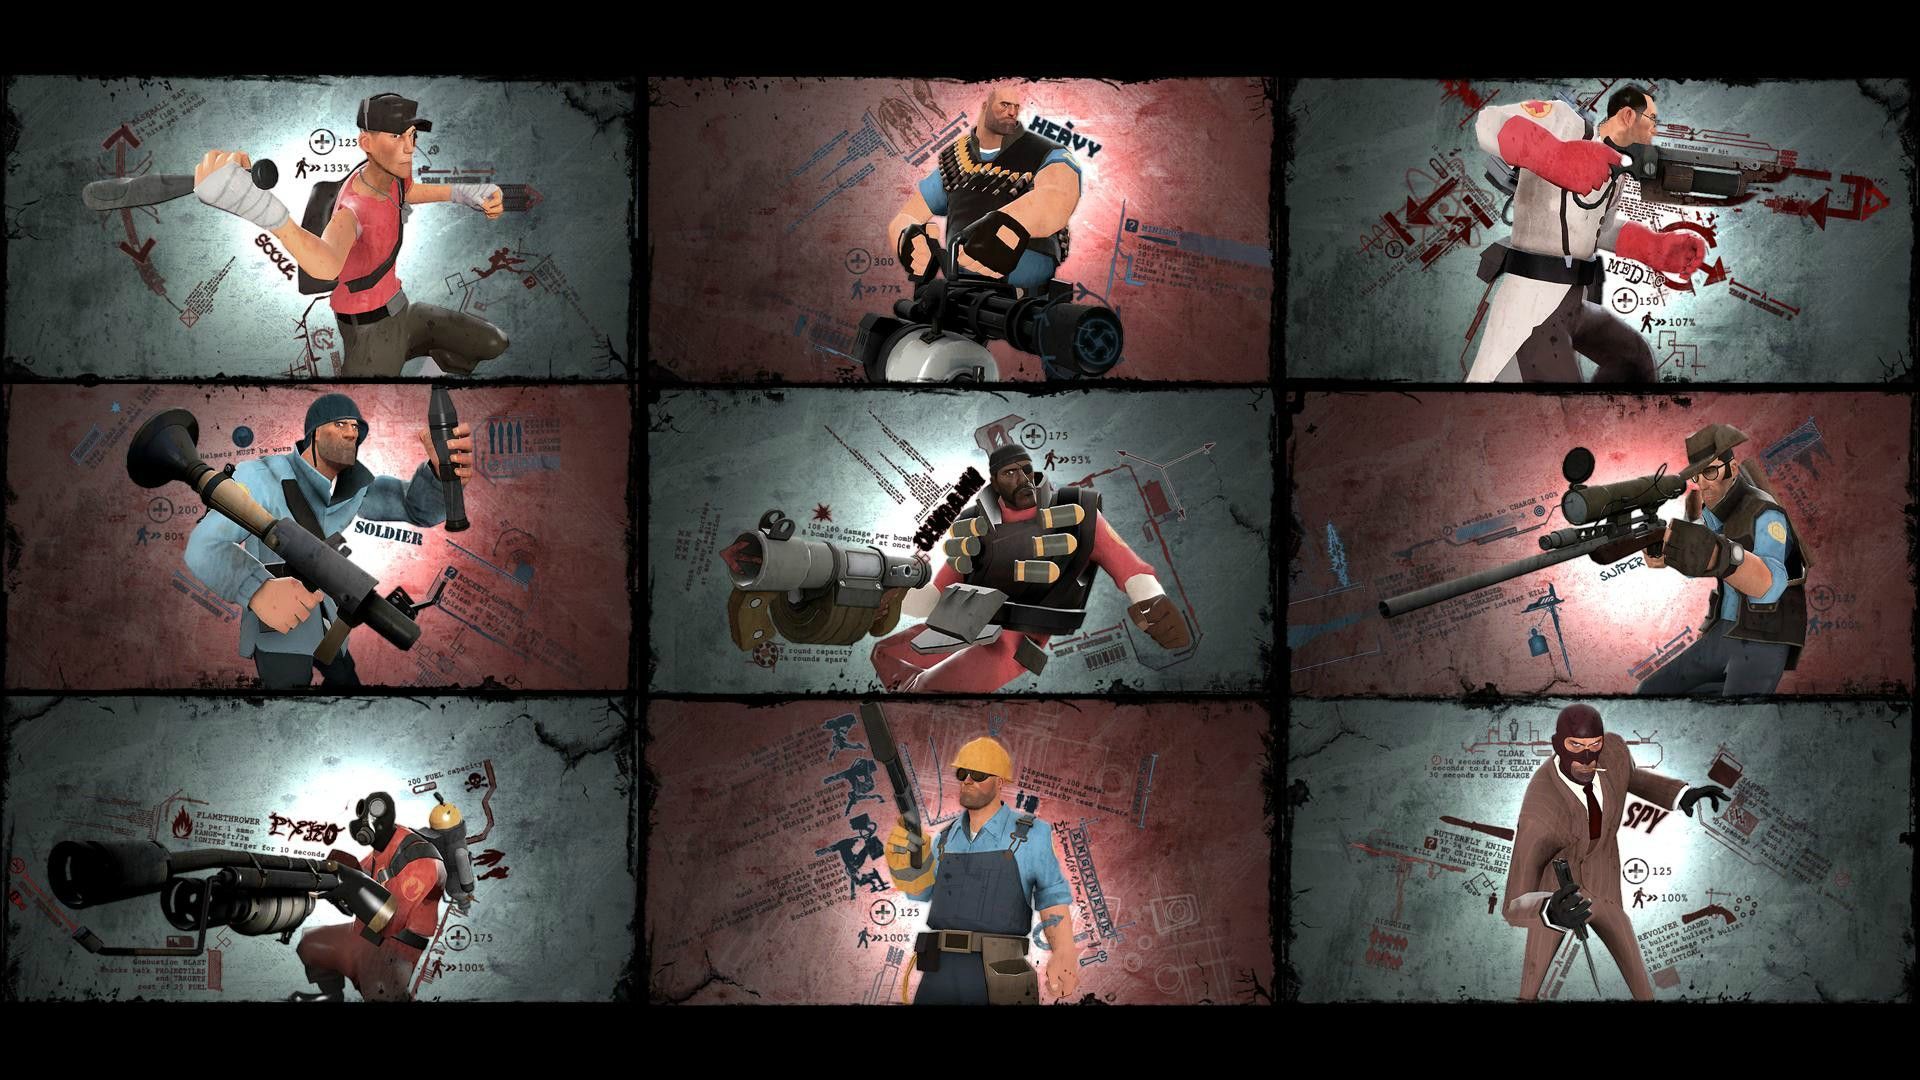 19 Cool Team Fortress 2 Wallpapers - BC-GB BaconCape